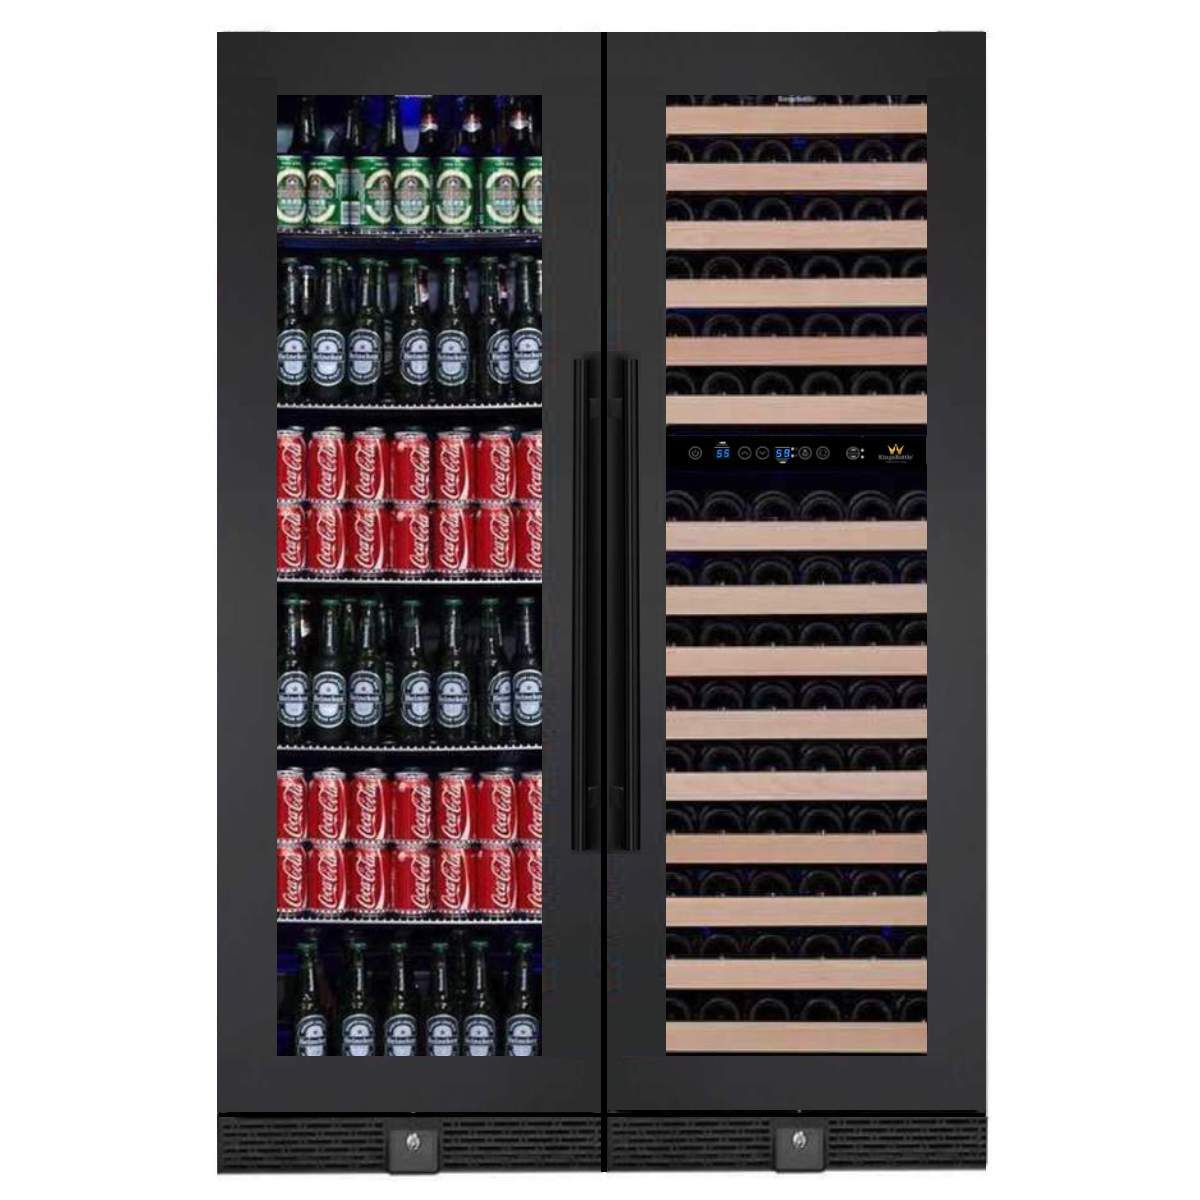 Kingsbottle 72" Tall Beer And Wine Refrigerator Combo With Glass Door KBU170BW3-FG-Wine Coolers-The Wine Cooler Club